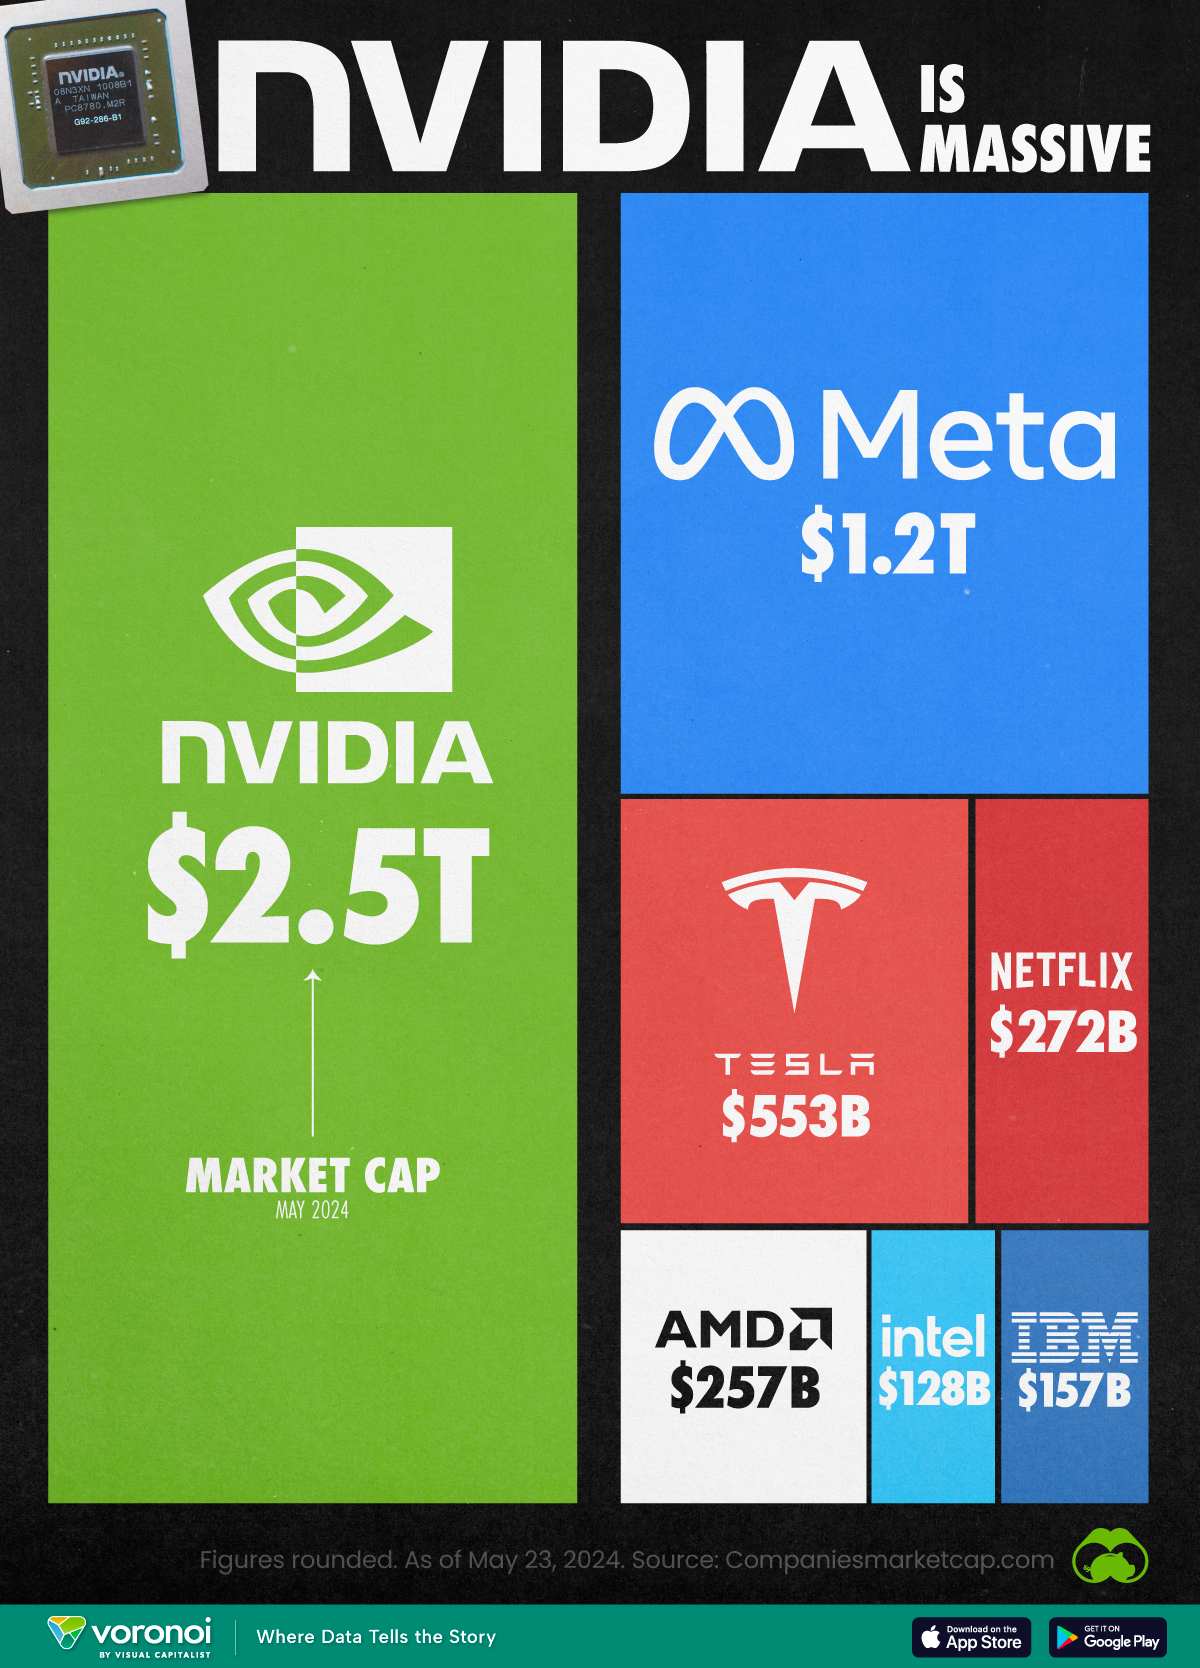 Graphic comparing the market cap of Nvidia to other major tech companies